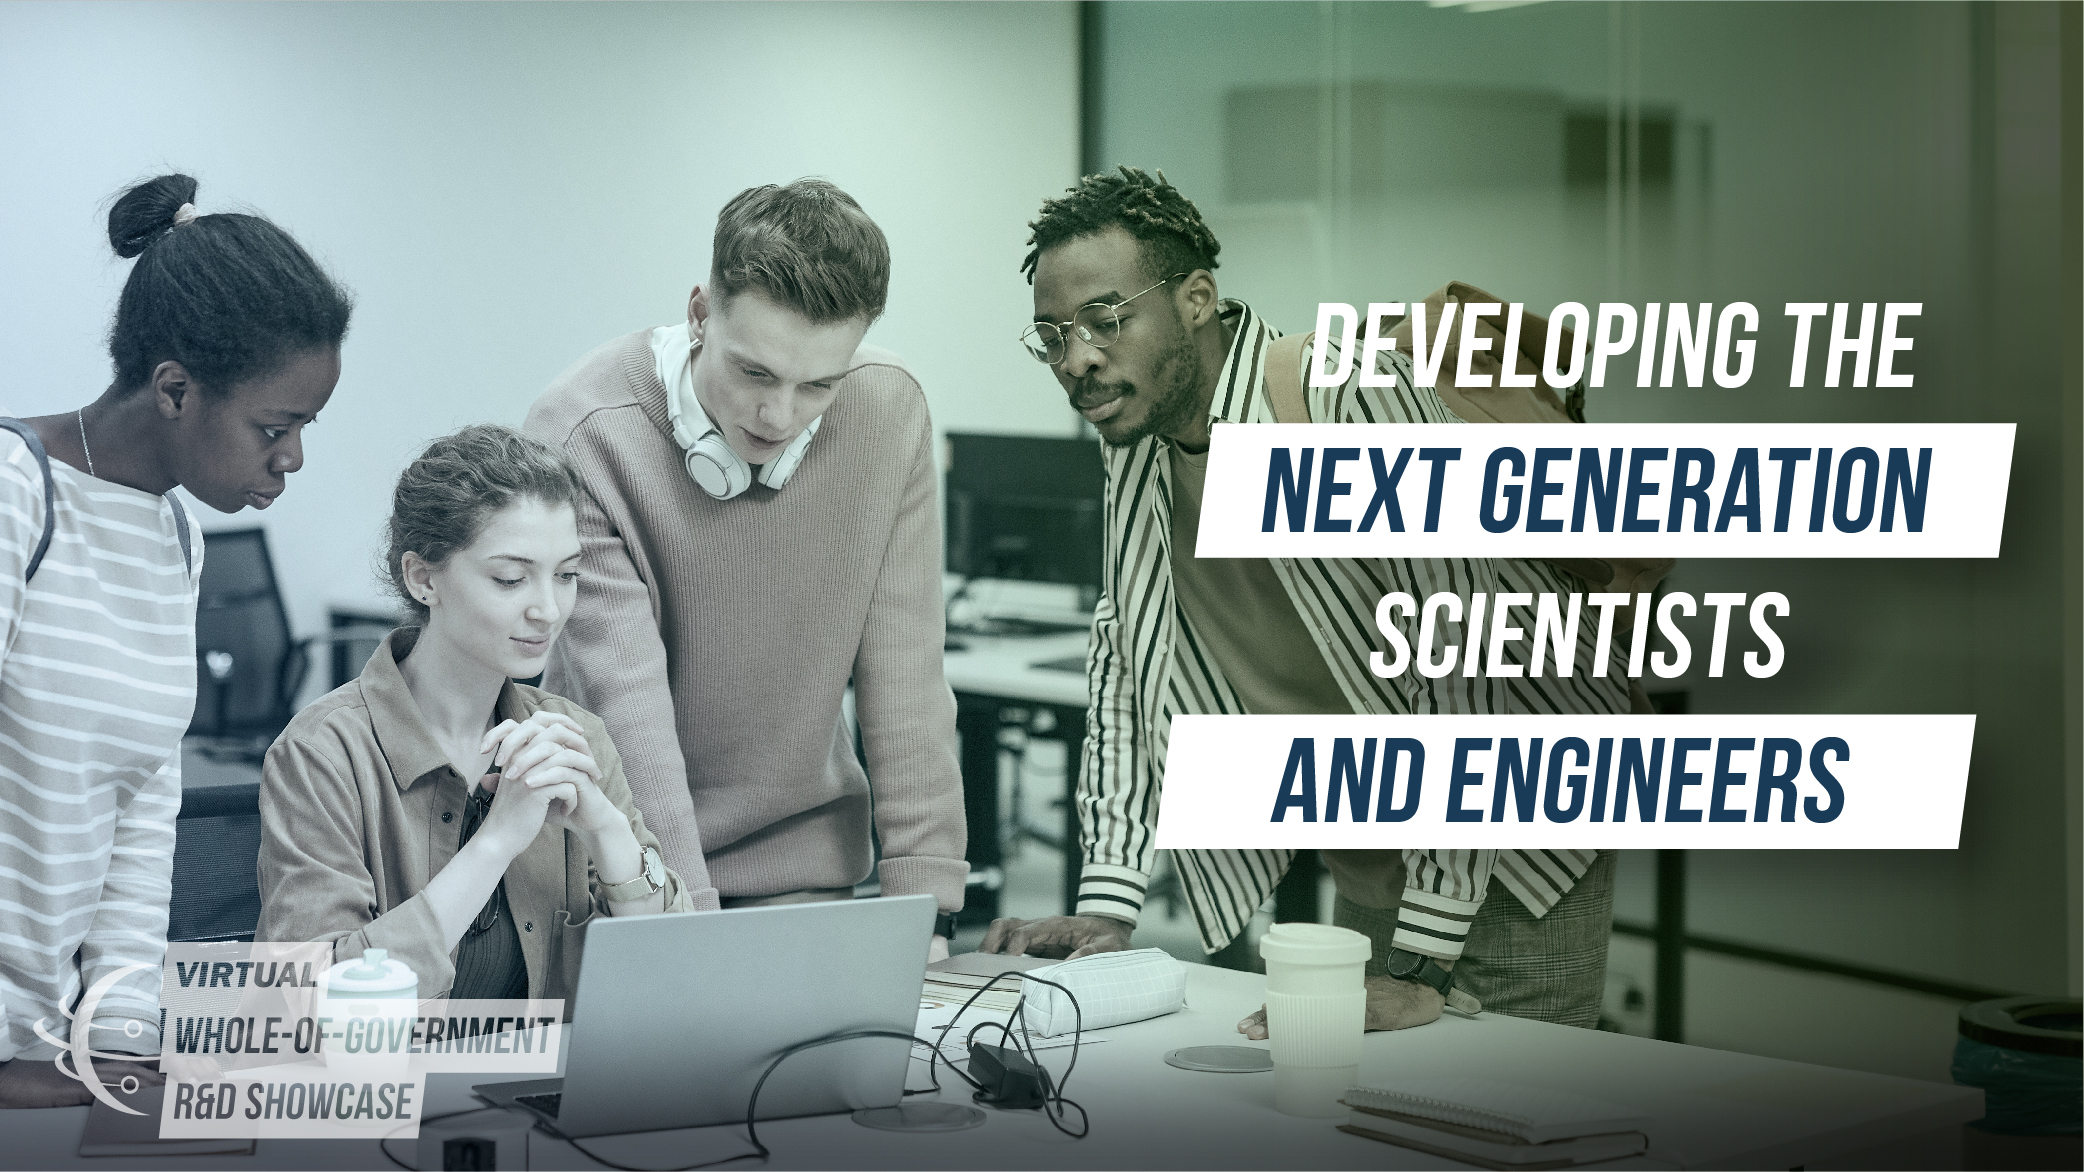 Developing the Next Generation Scientists and Engineers